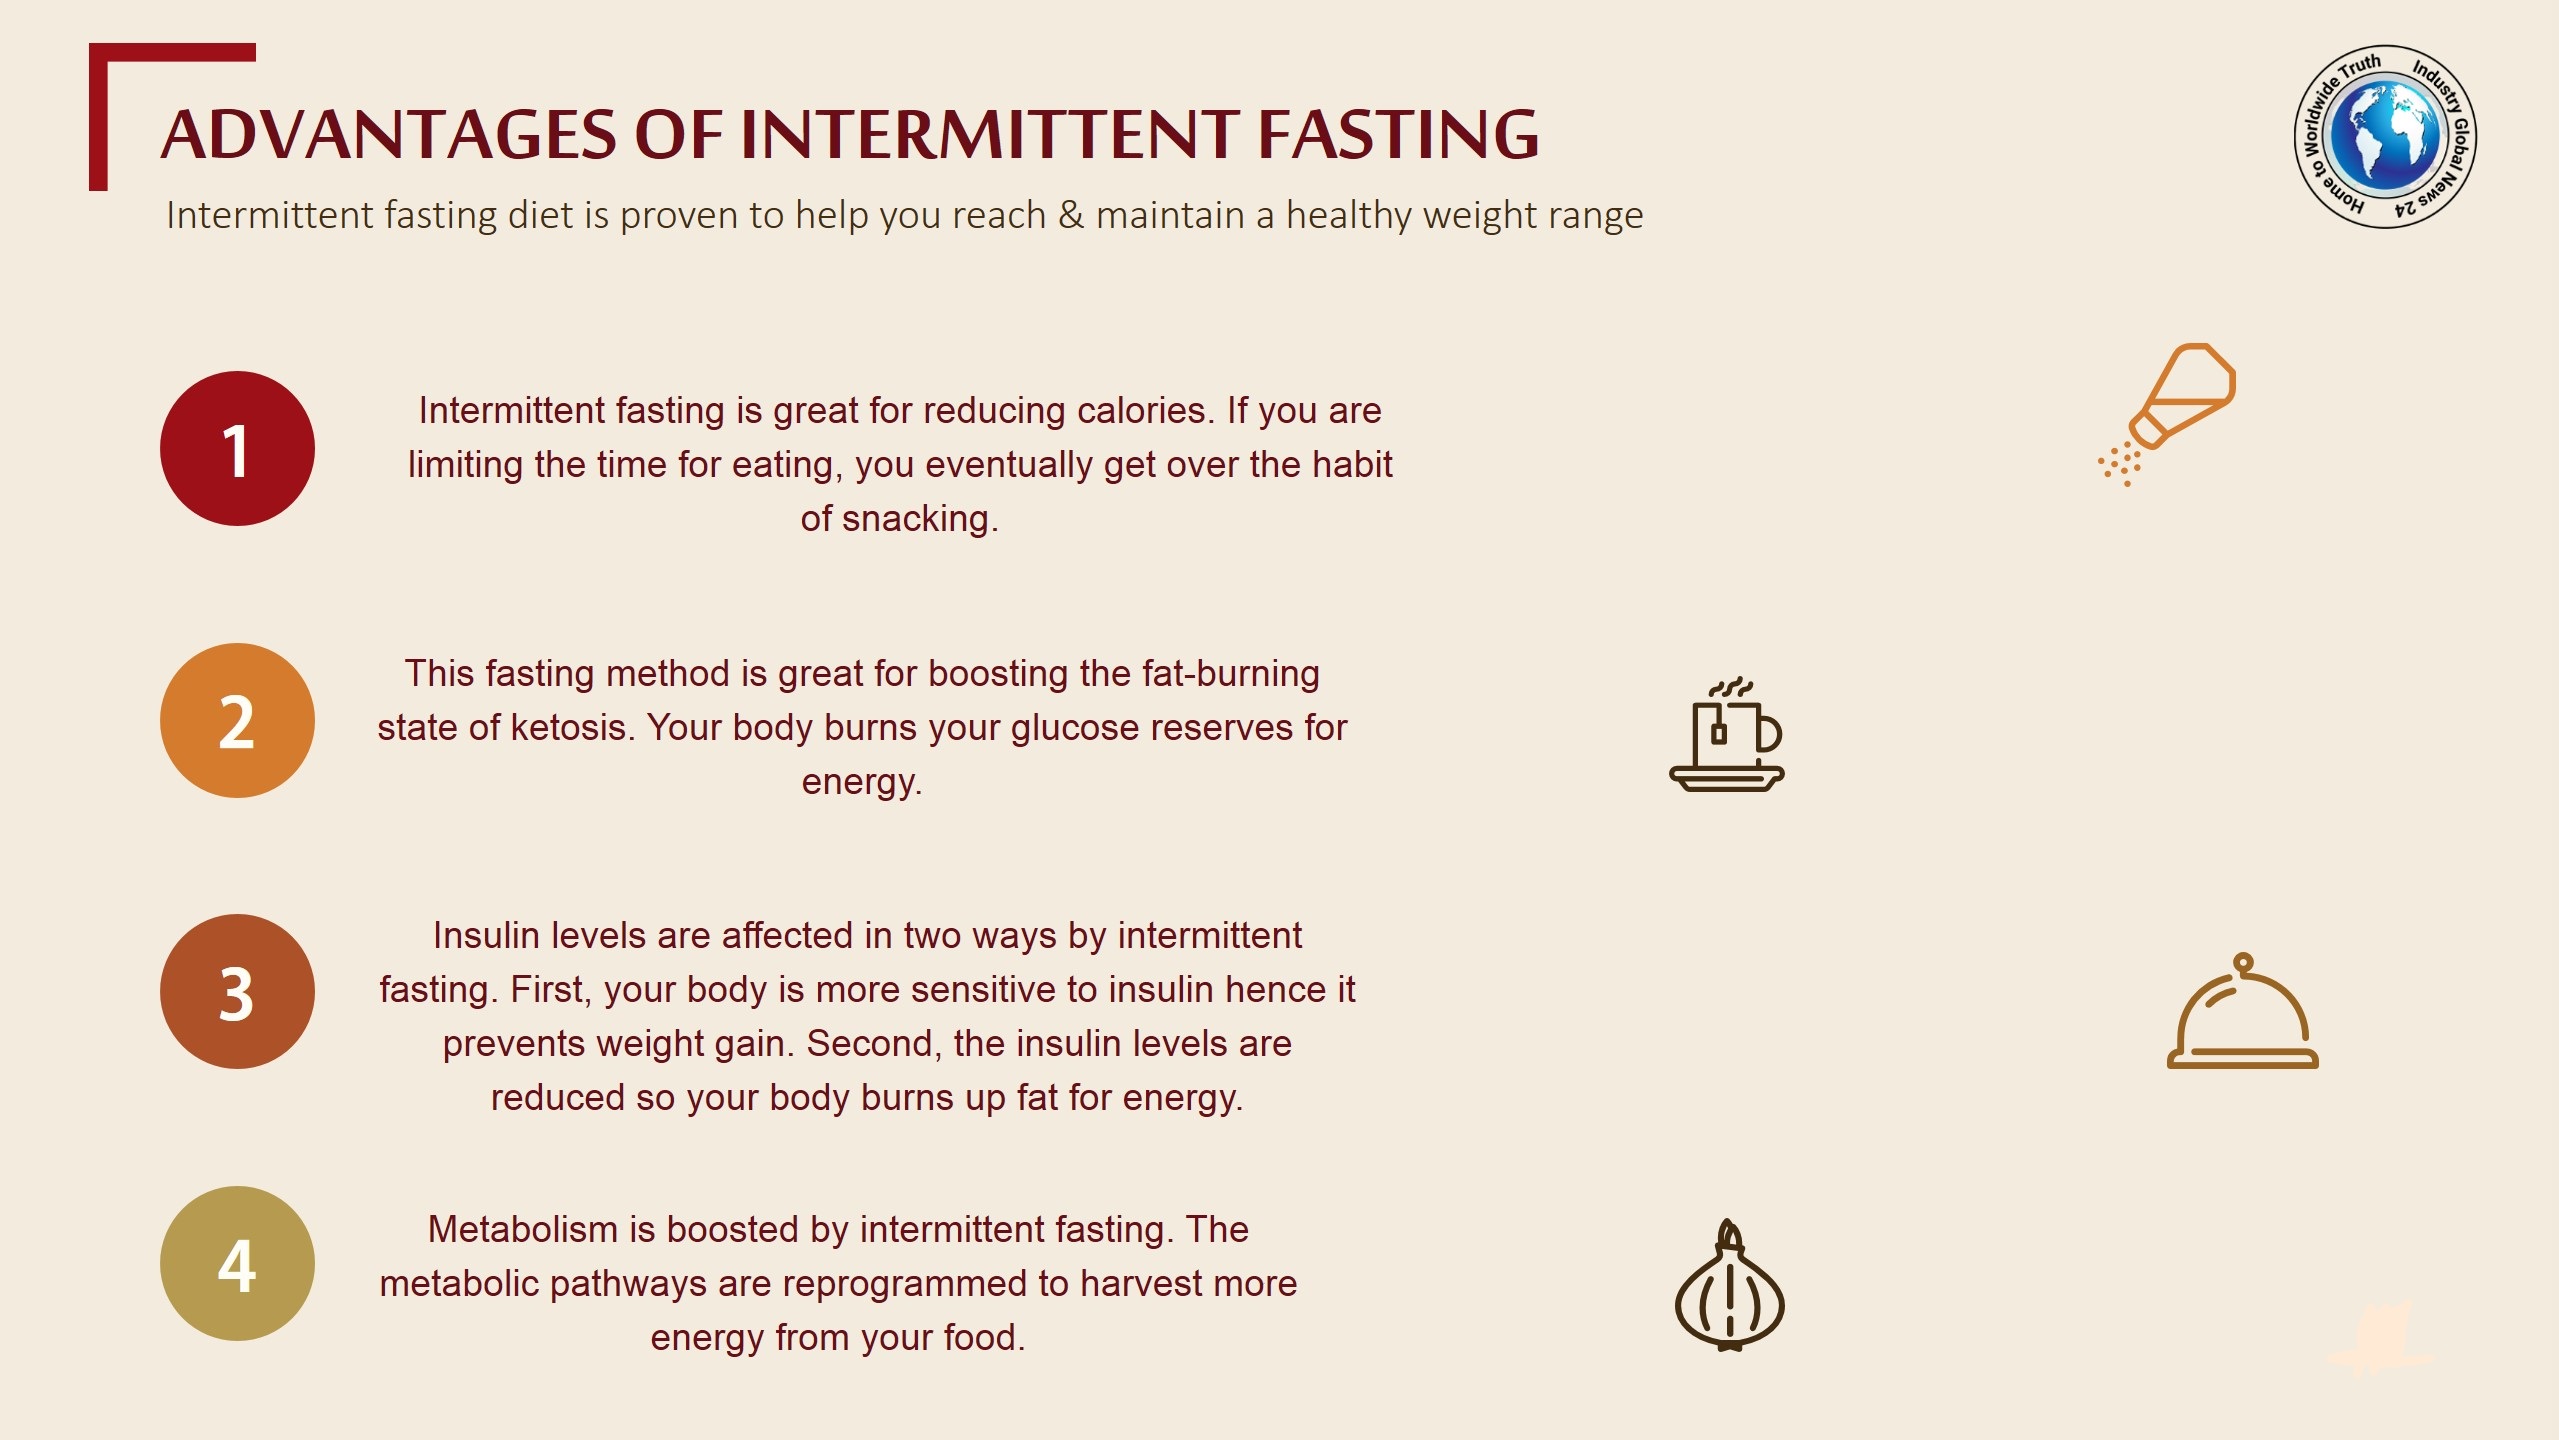 Advantages of intermittent fasting